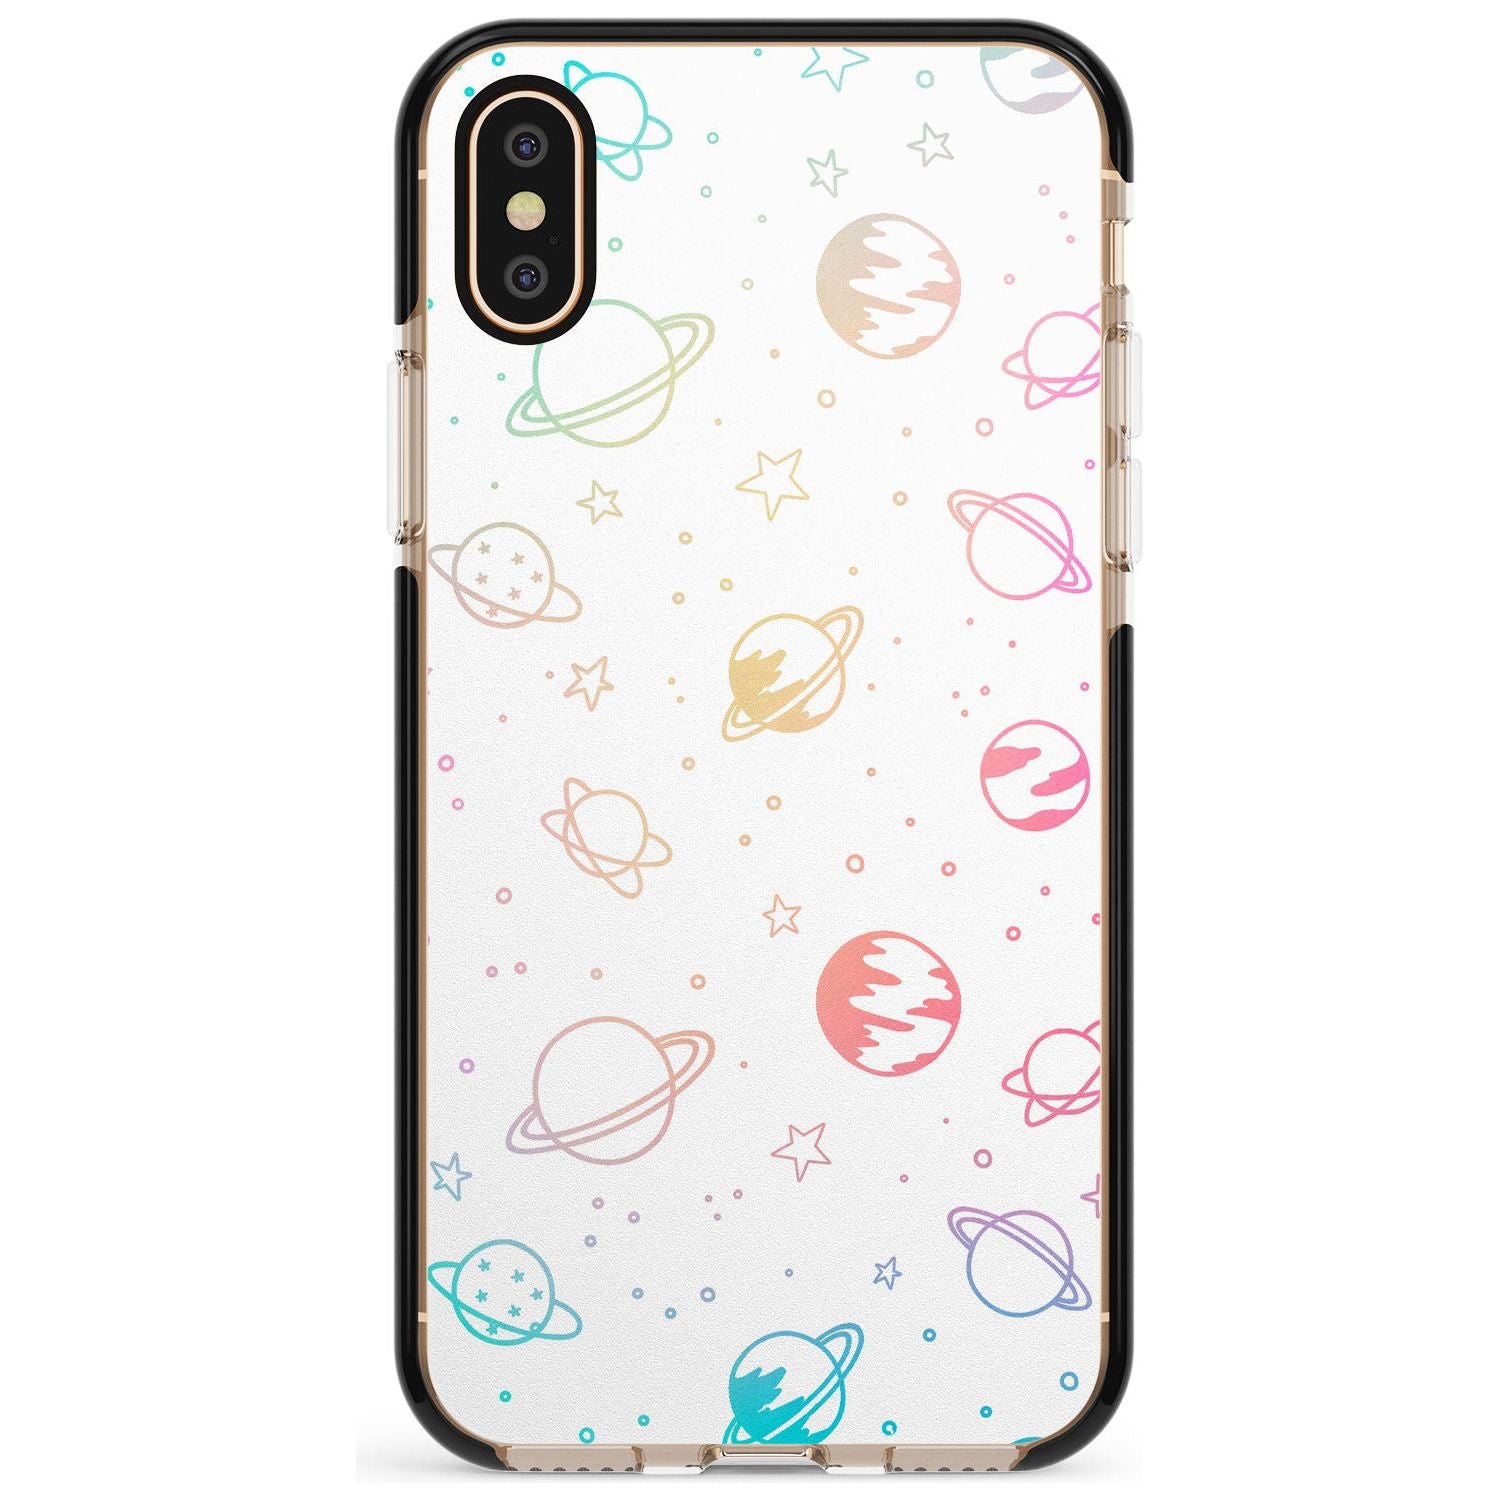 Outer Space Outlines: Pastels on White Pink Fade Impact Phone Case for iPhone X XS Max XR